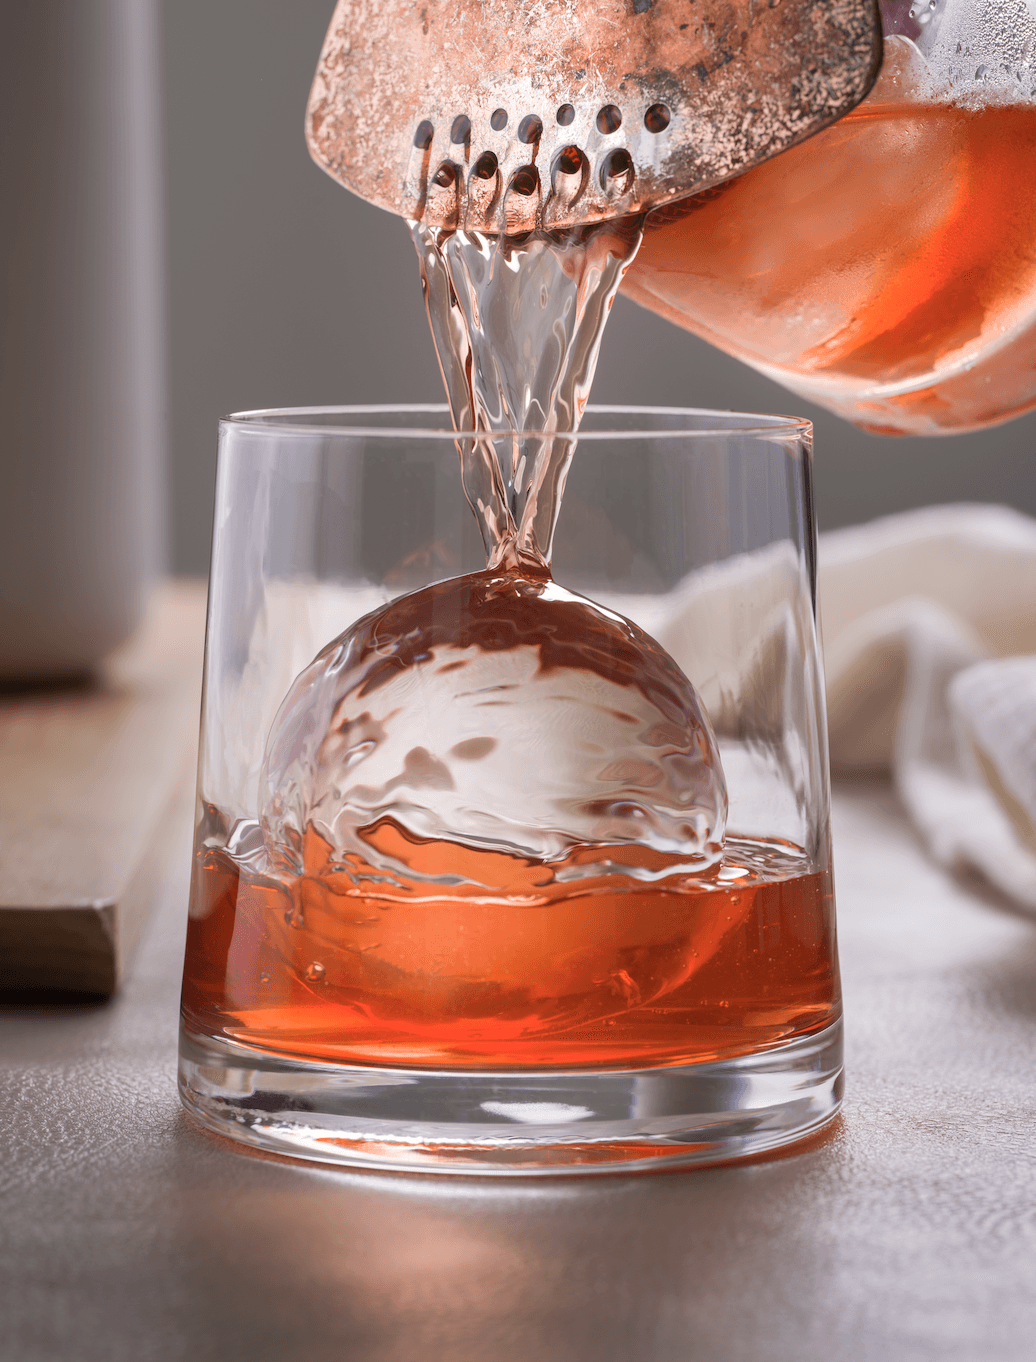 Chocolate Old Fashioned - Chisel & Fork